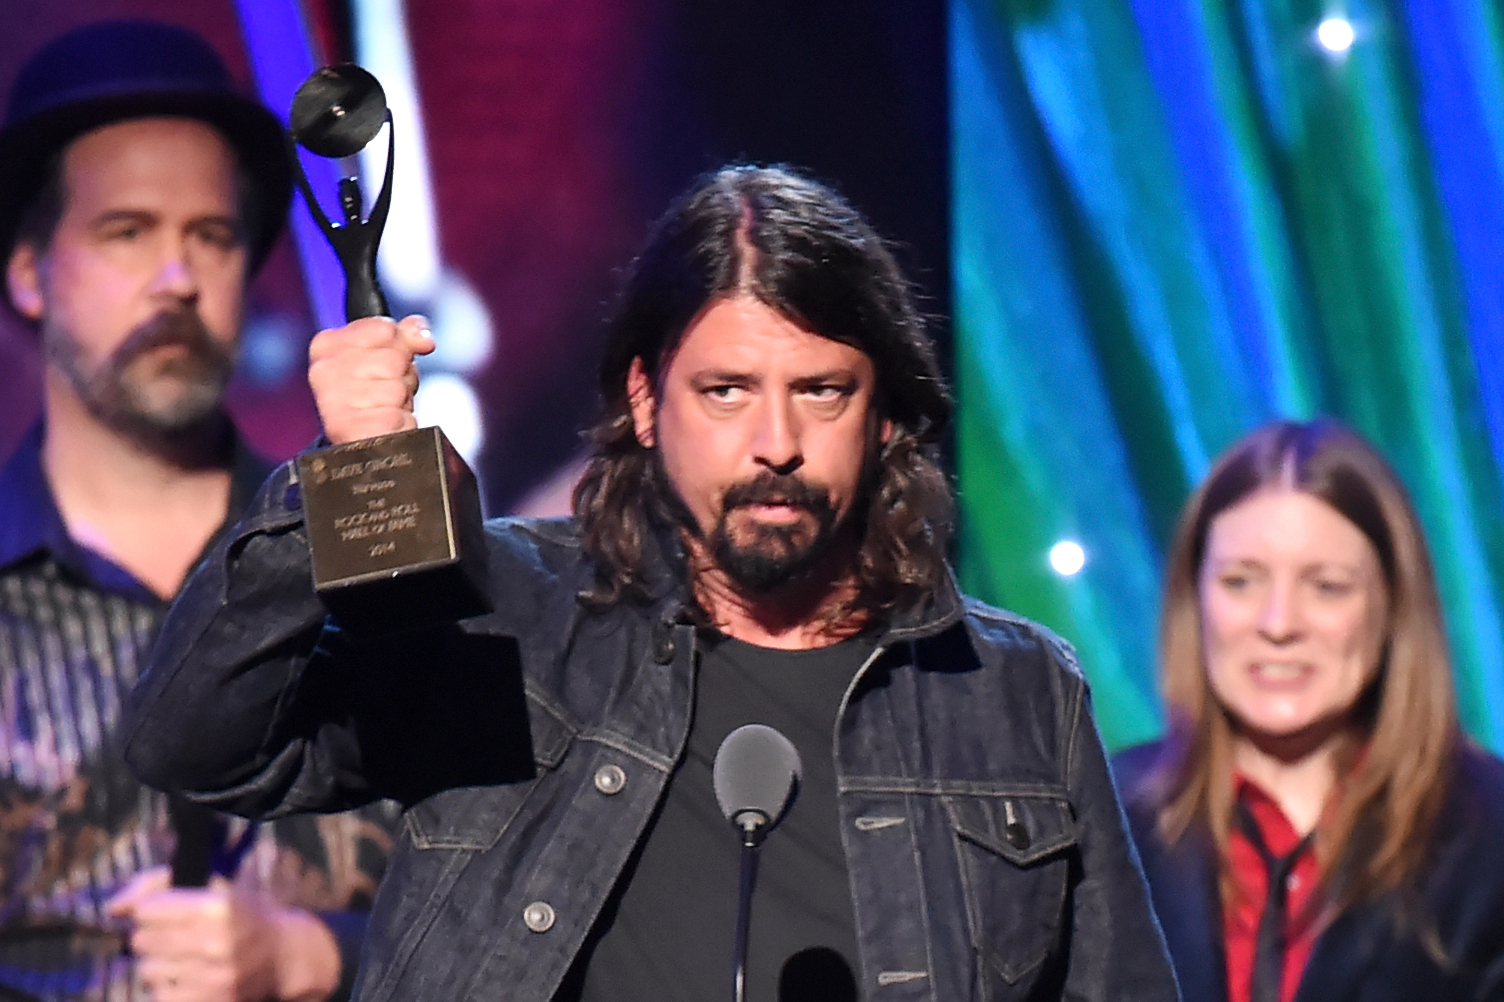 From left: Krist Novoselic, Dave Grohl and Kimberly Cobain at the 29th Annual Rock And Roll Hall Of Fame Induction Ceremony, on April 10, 2014 in Brooklyn, N.Y. (Jeff Kravitz—Getty Images)